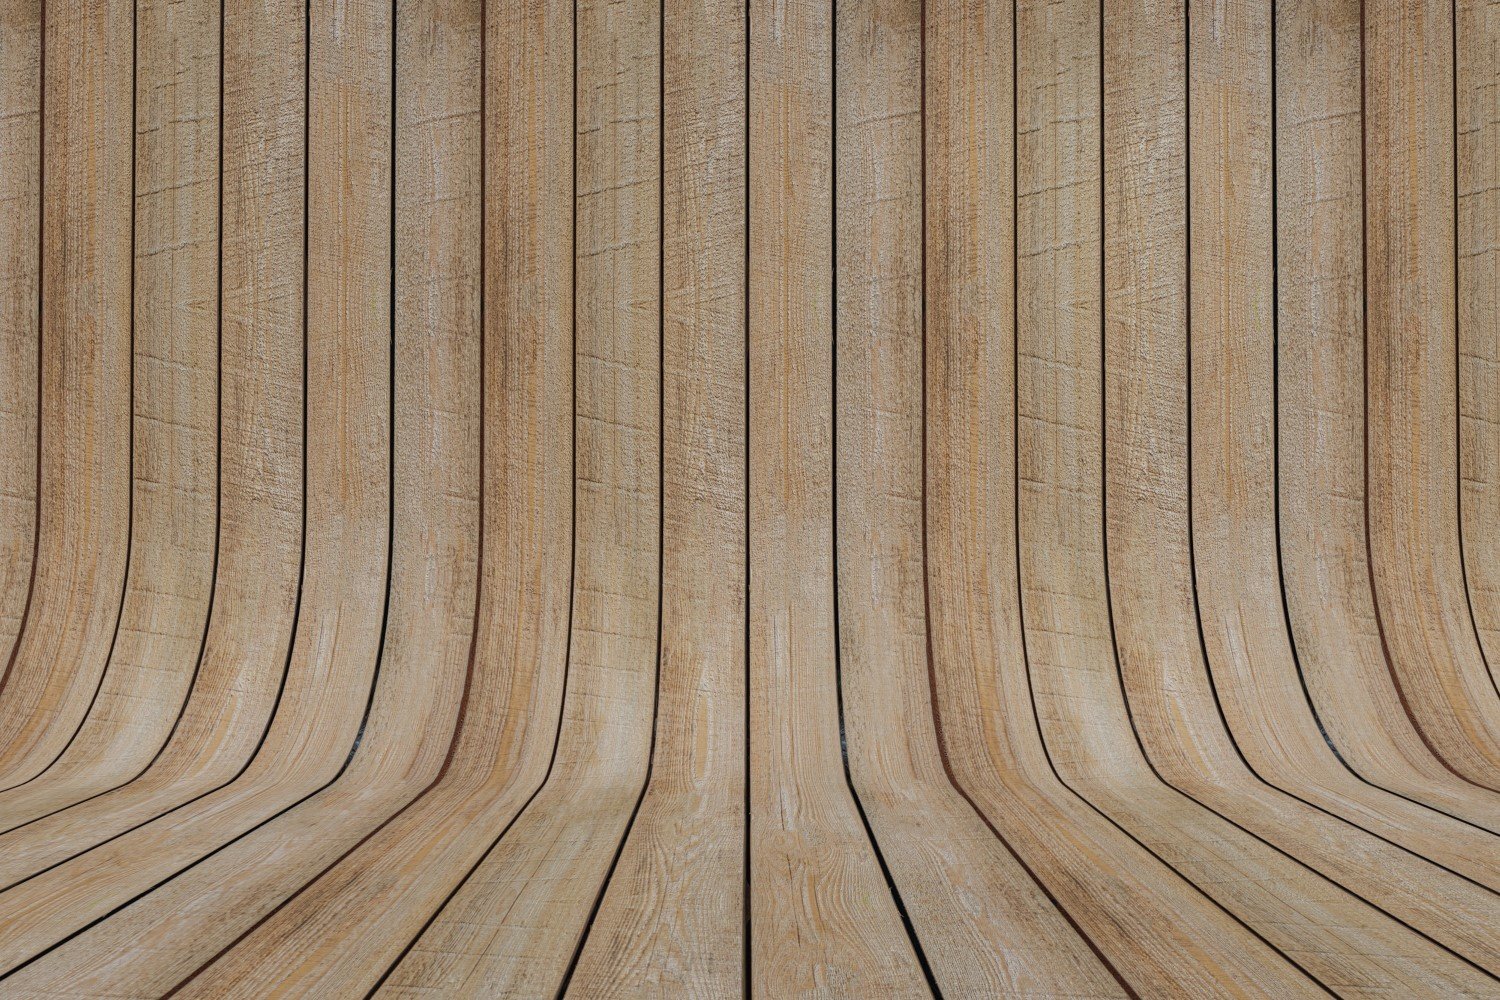 Curved brown color Wood Parquet background.